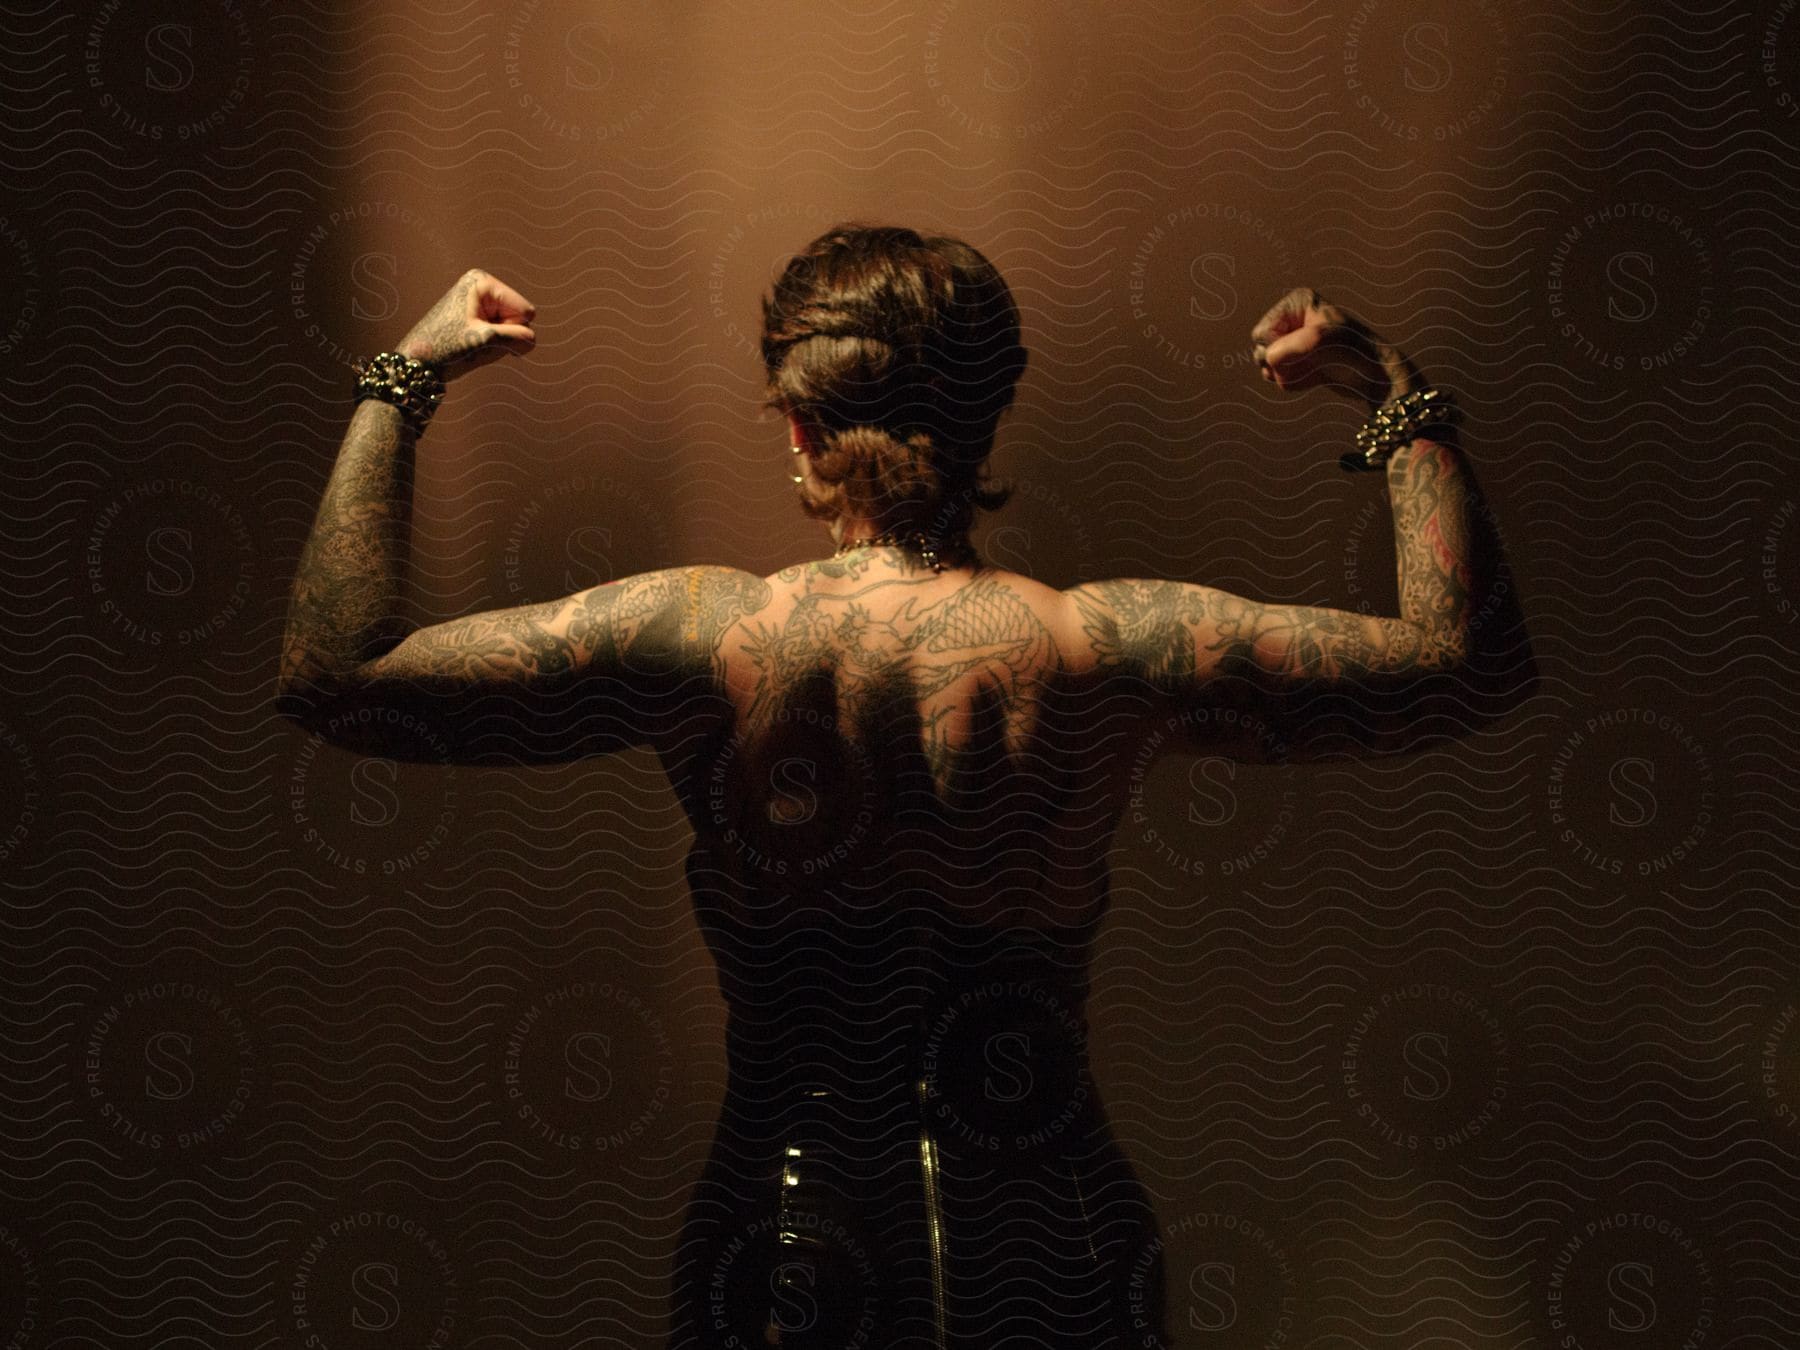 A woman with tattoos wearing a black dress flexes her biceps